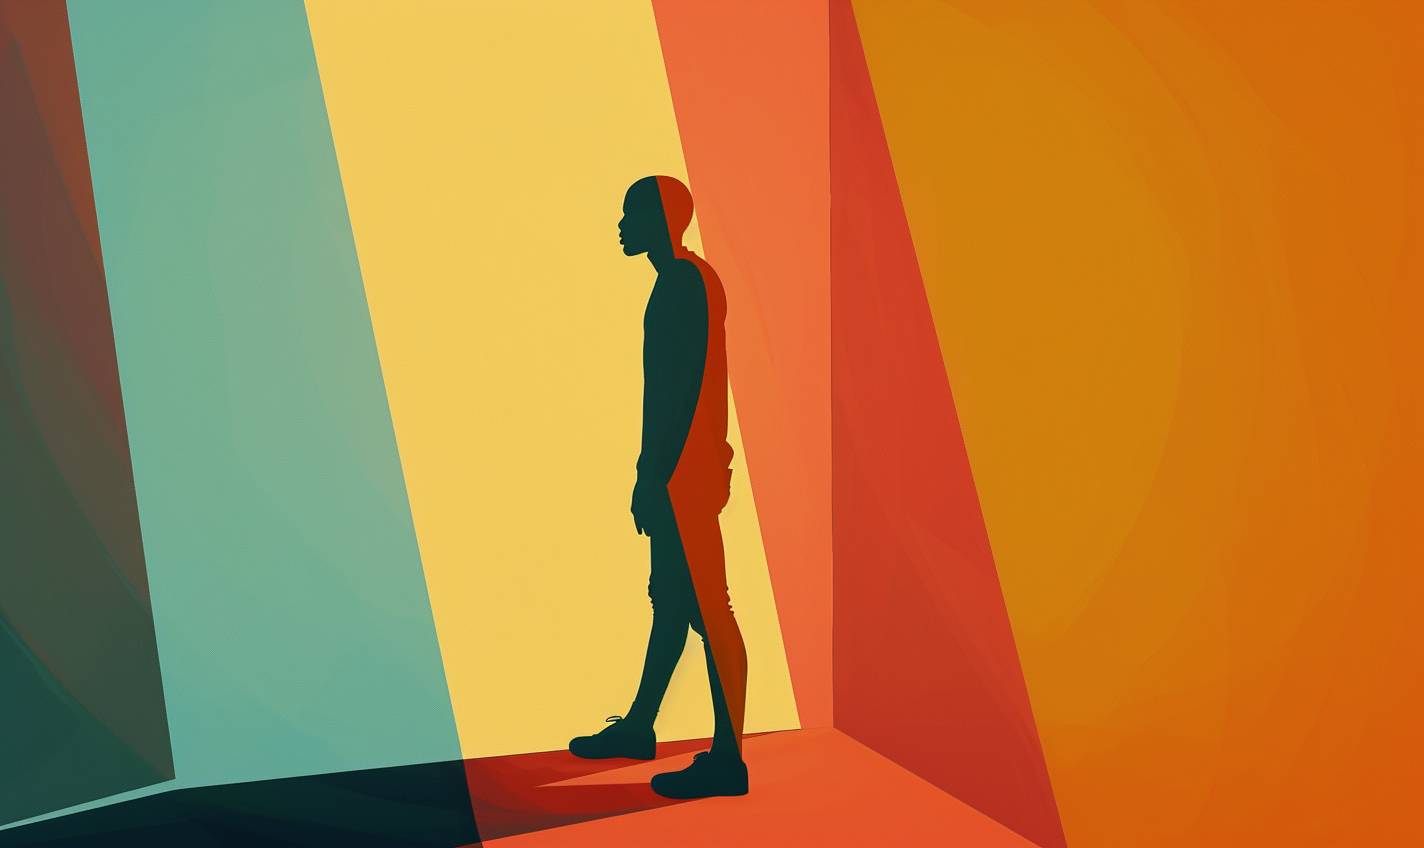 [SUBJECT], in the style of minimalist illustrator, reinterpreted human form, iconic album covers, [COLOR] and [COLOR], stop-motion animation, elongated forms, flat illustrations